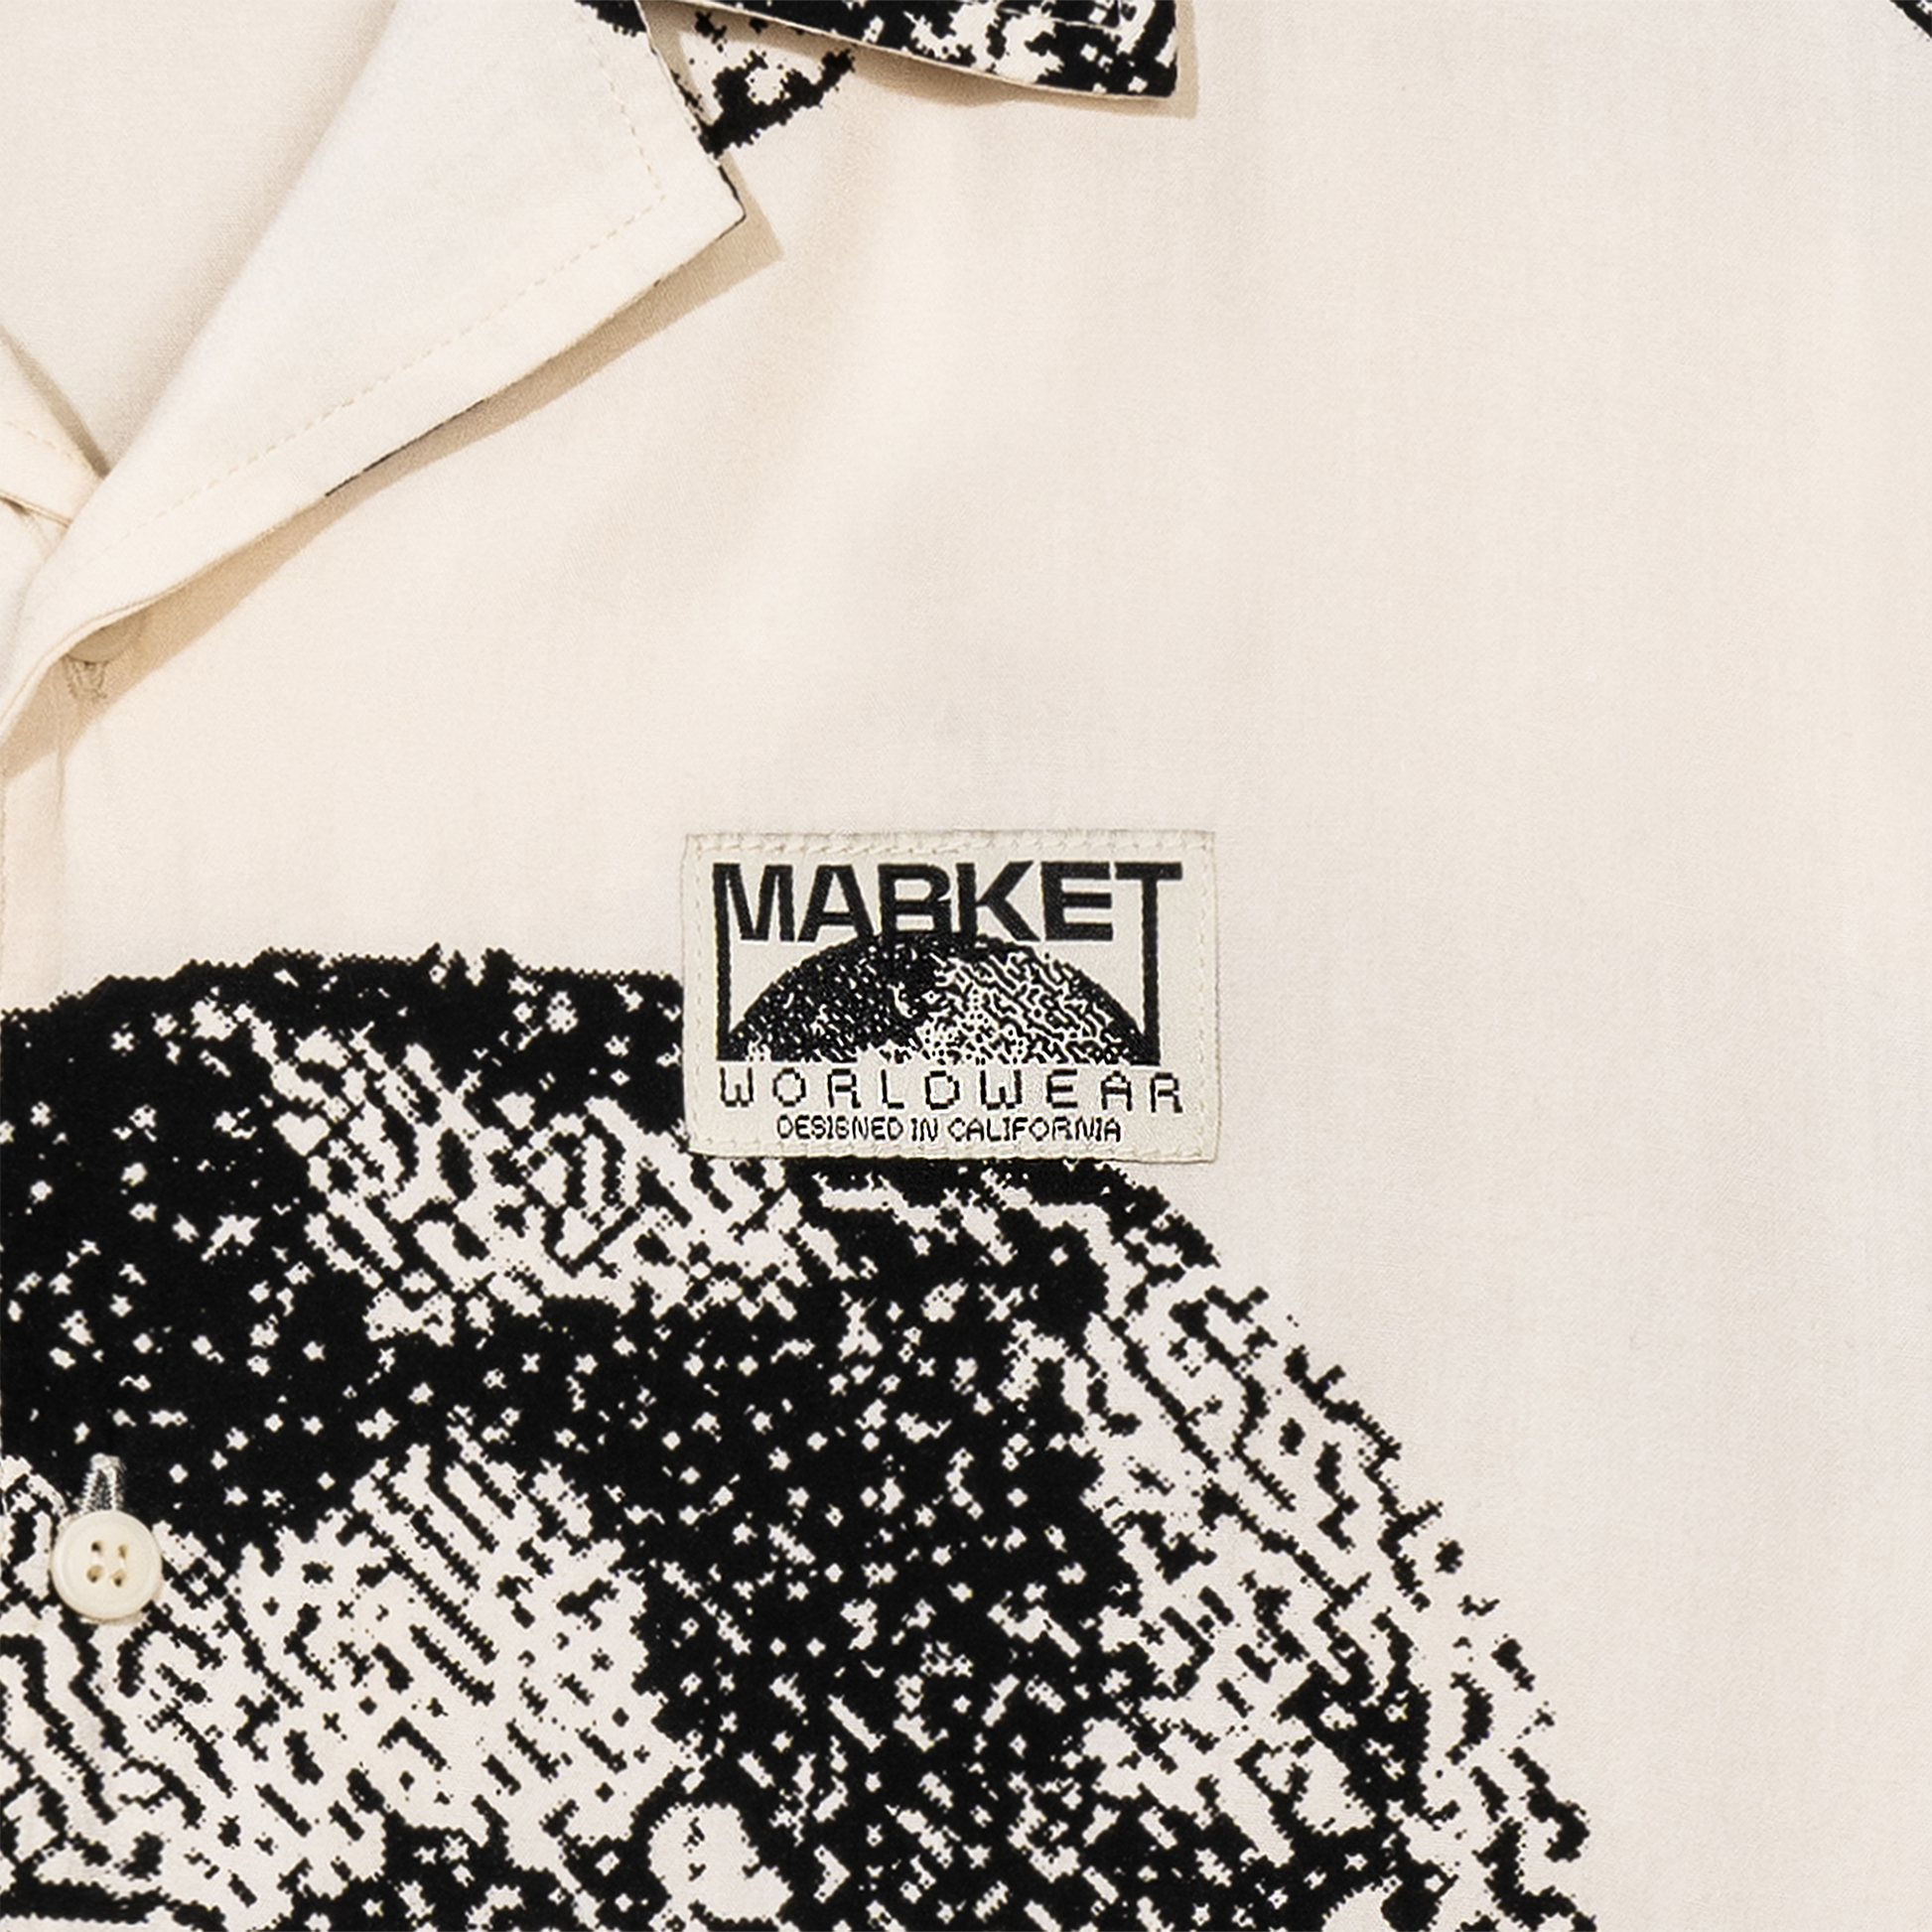 MARKET clothing brand BITMAP SS BUTTON UP. Find more graphic tees, hats, hoodies and more at MarketStudios.com. Formally Chinatown Market.